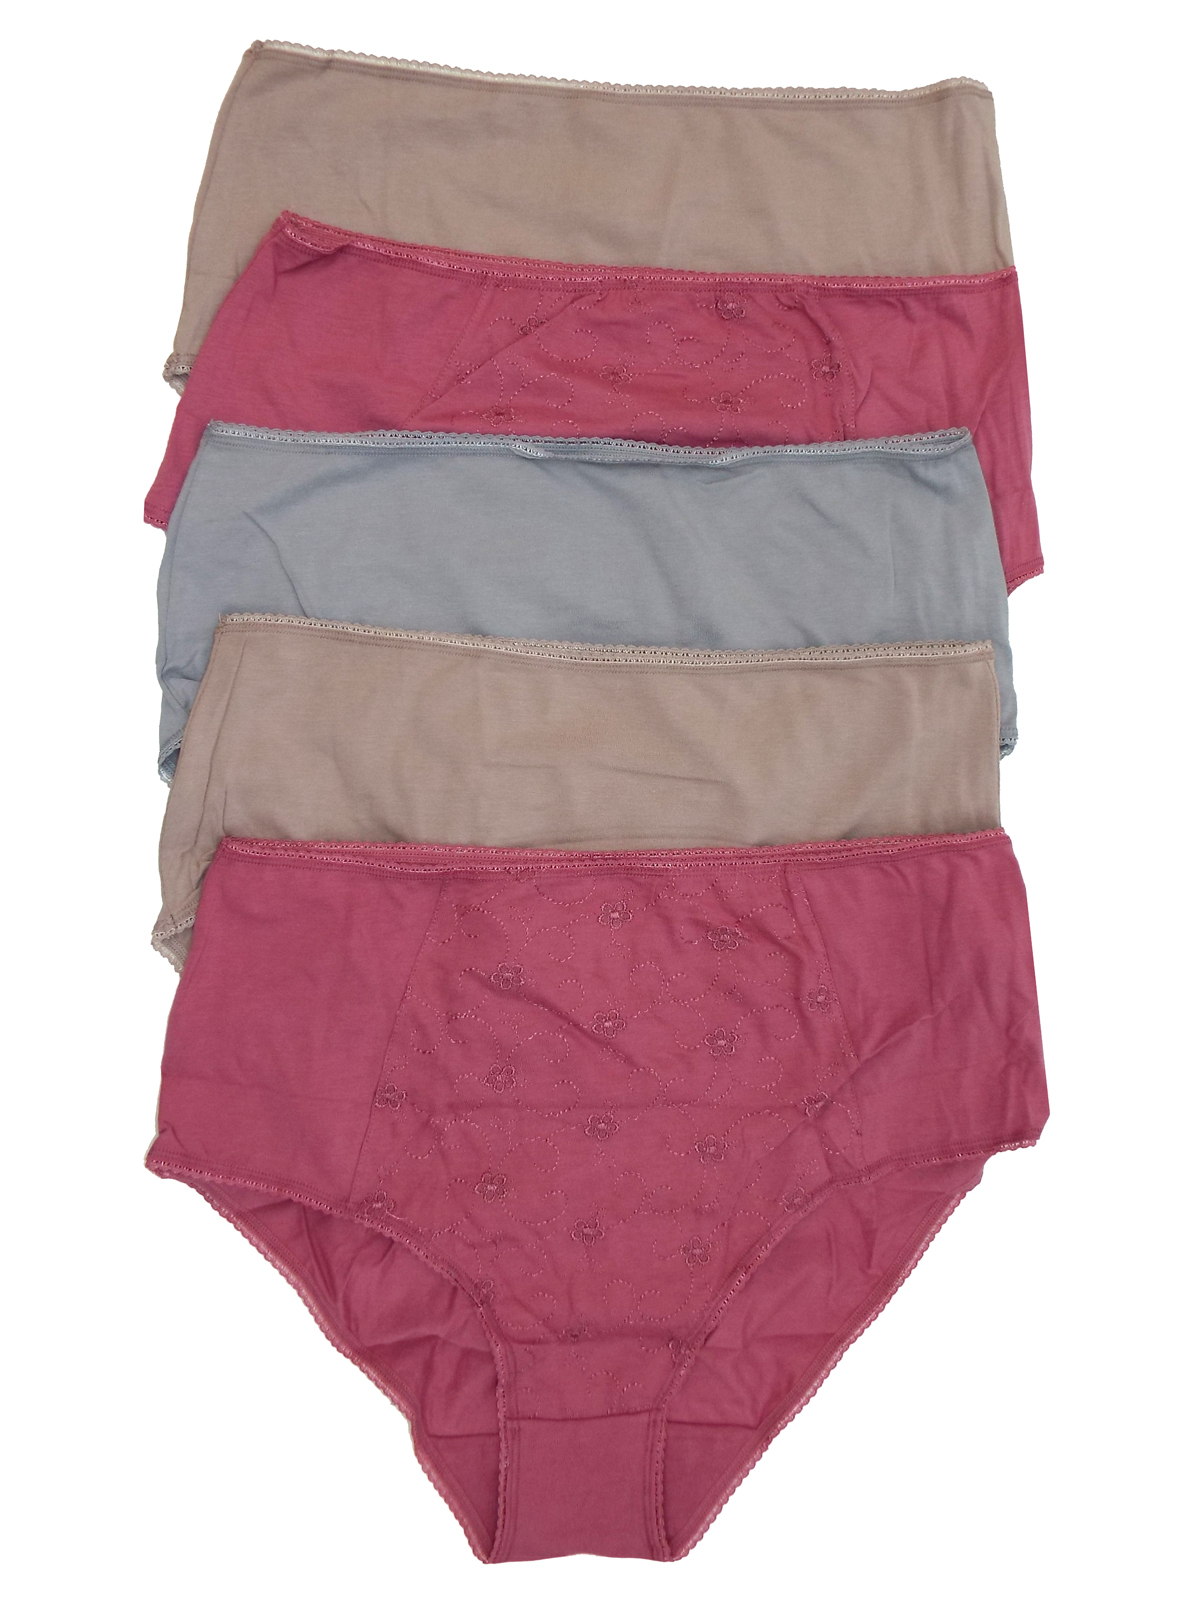 George - - ASSORTED Plain & Embroidered 5-Pack Full Briefs - Size 10 to 24